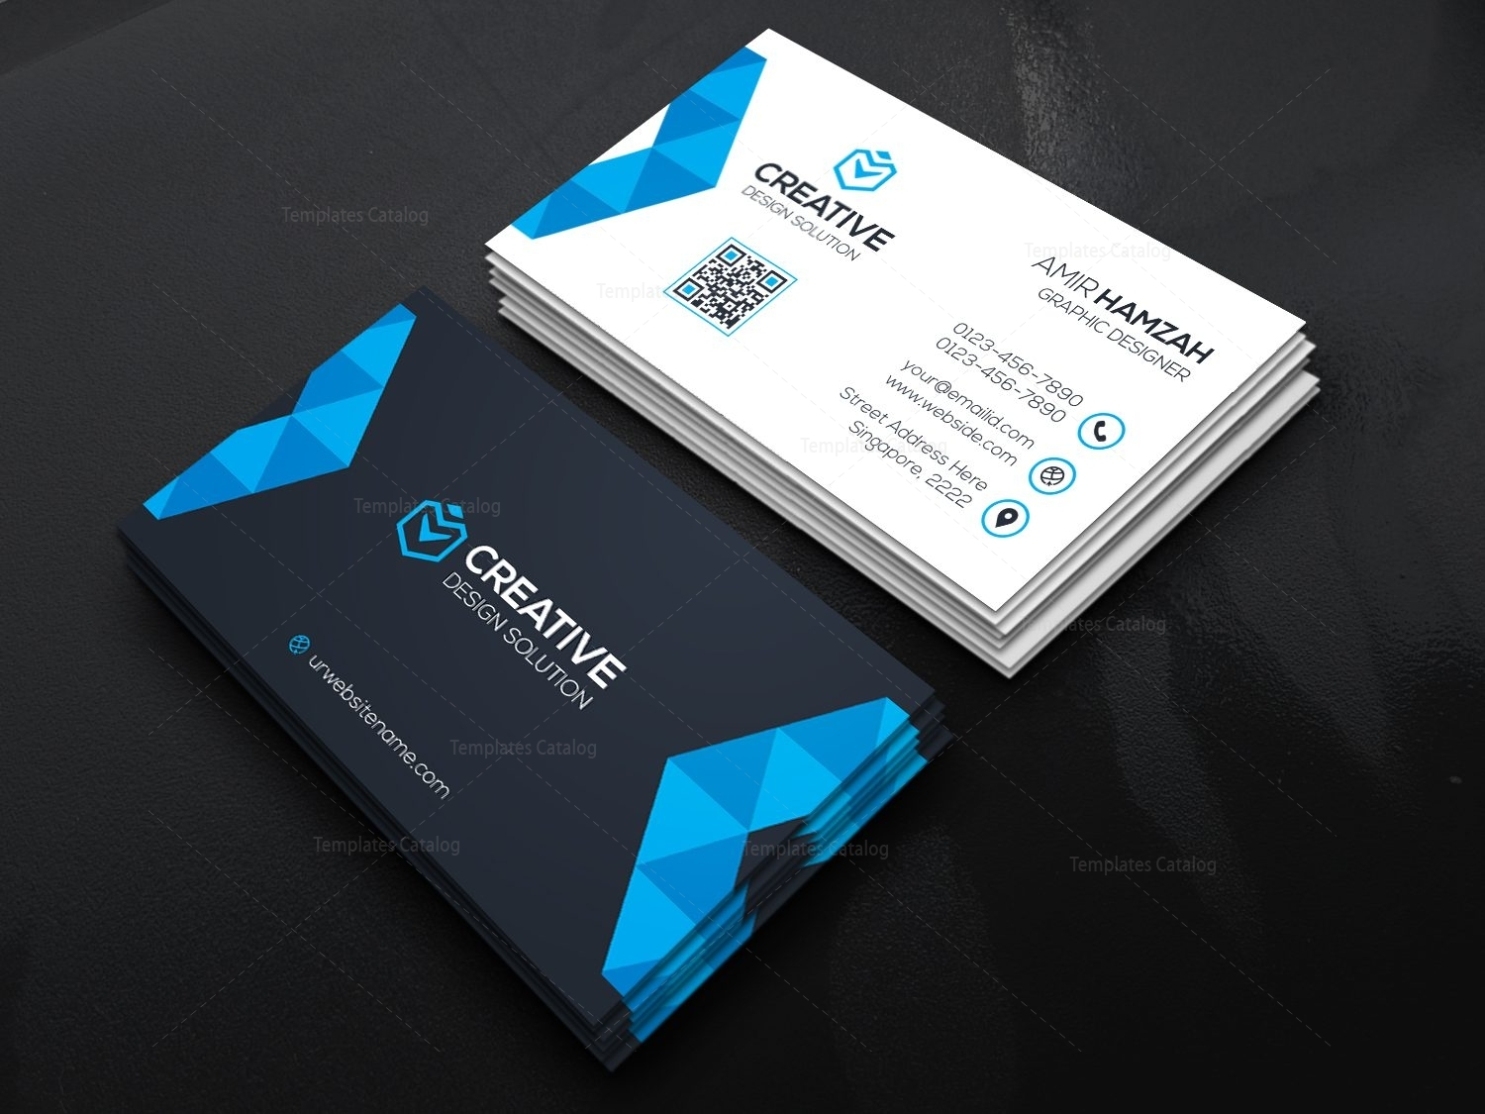 Creative Business Card Design 000469 - Template Catalog For Company Business Cards Templates